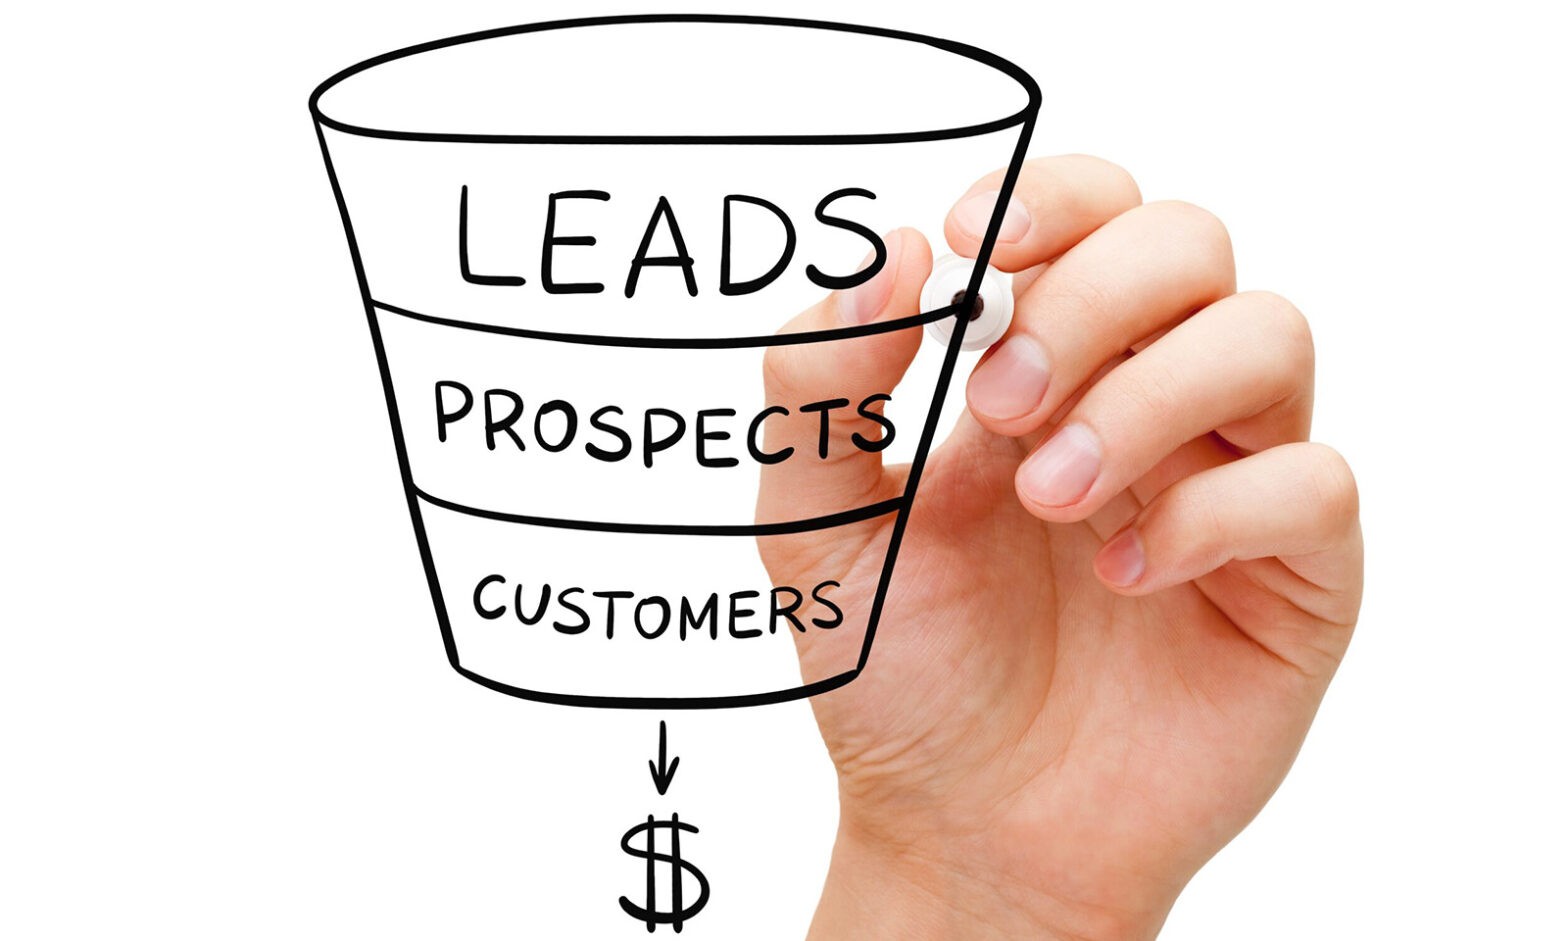 Why does a 100-year old Sales Funnel make sense_